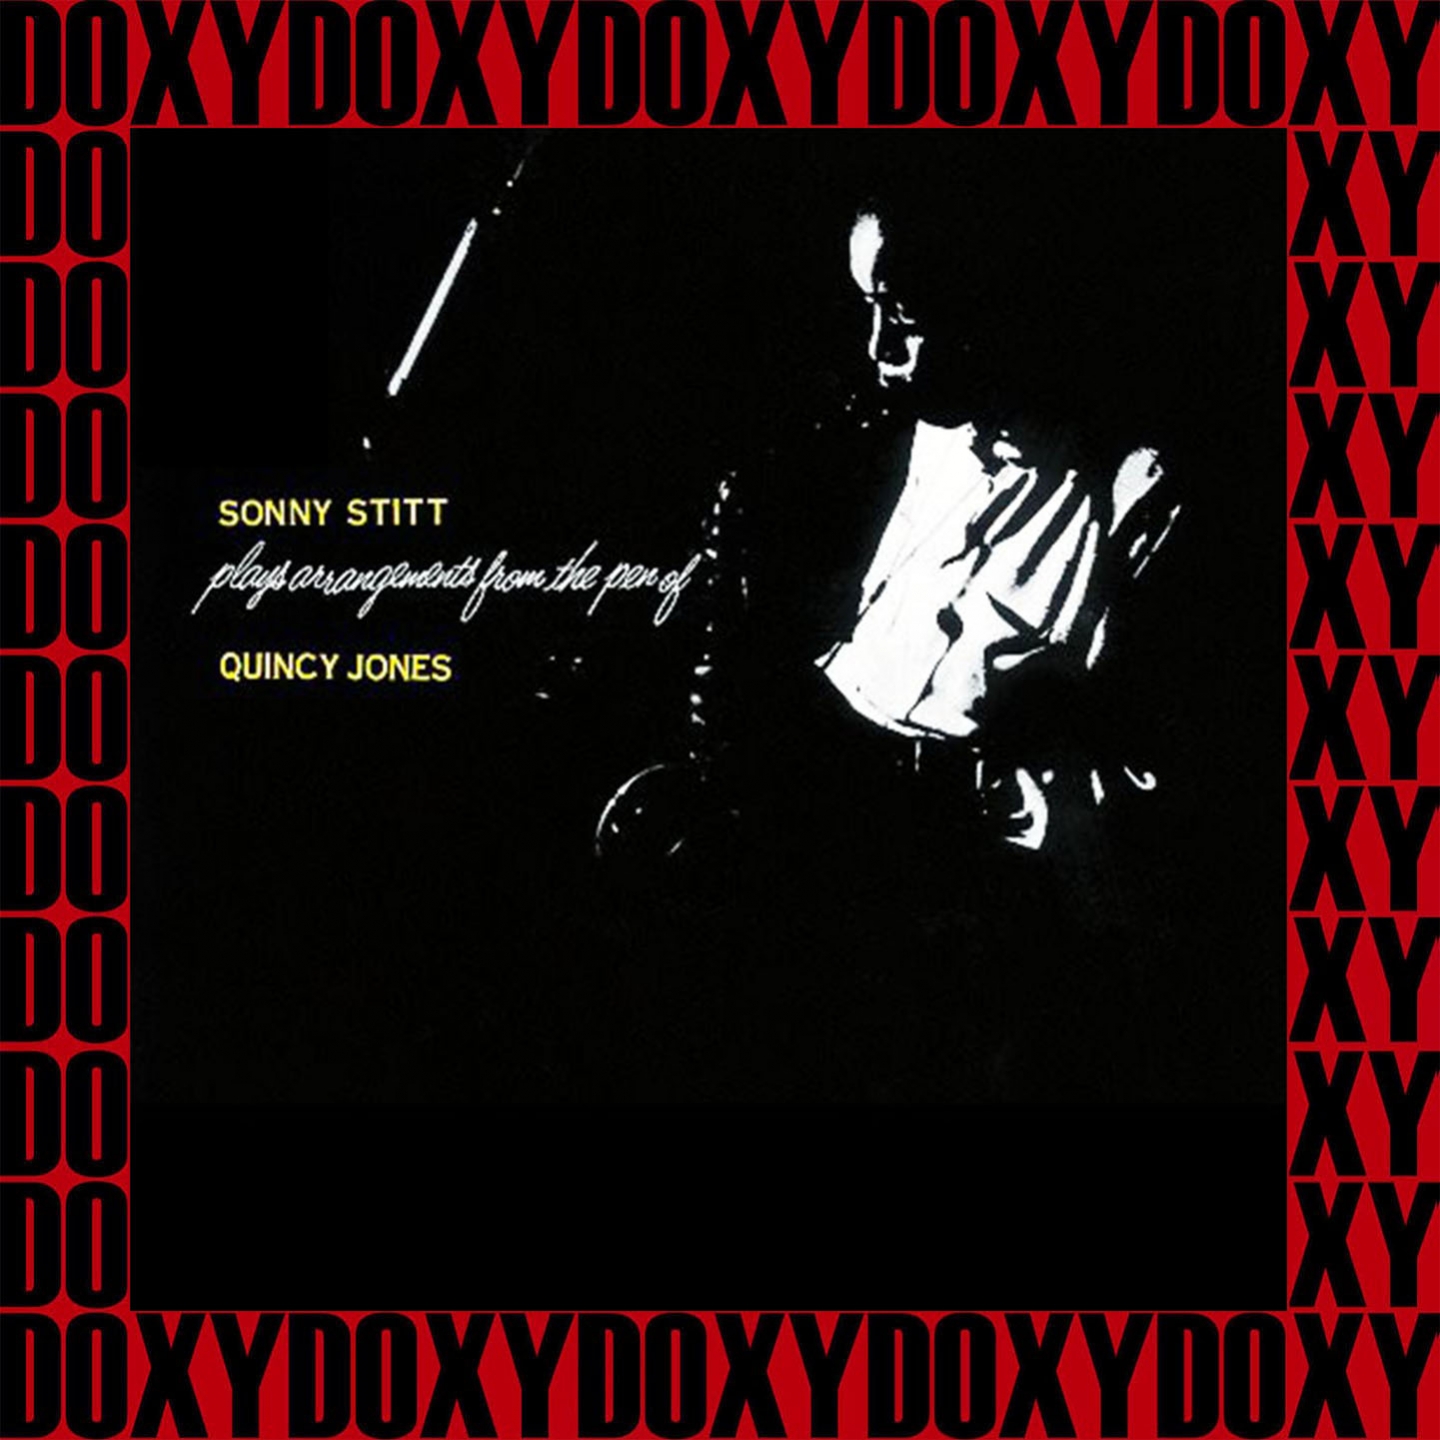 Plays Arrangements From The Pen Of Quincy Jones (Remastered Version) (Doxy Collection)